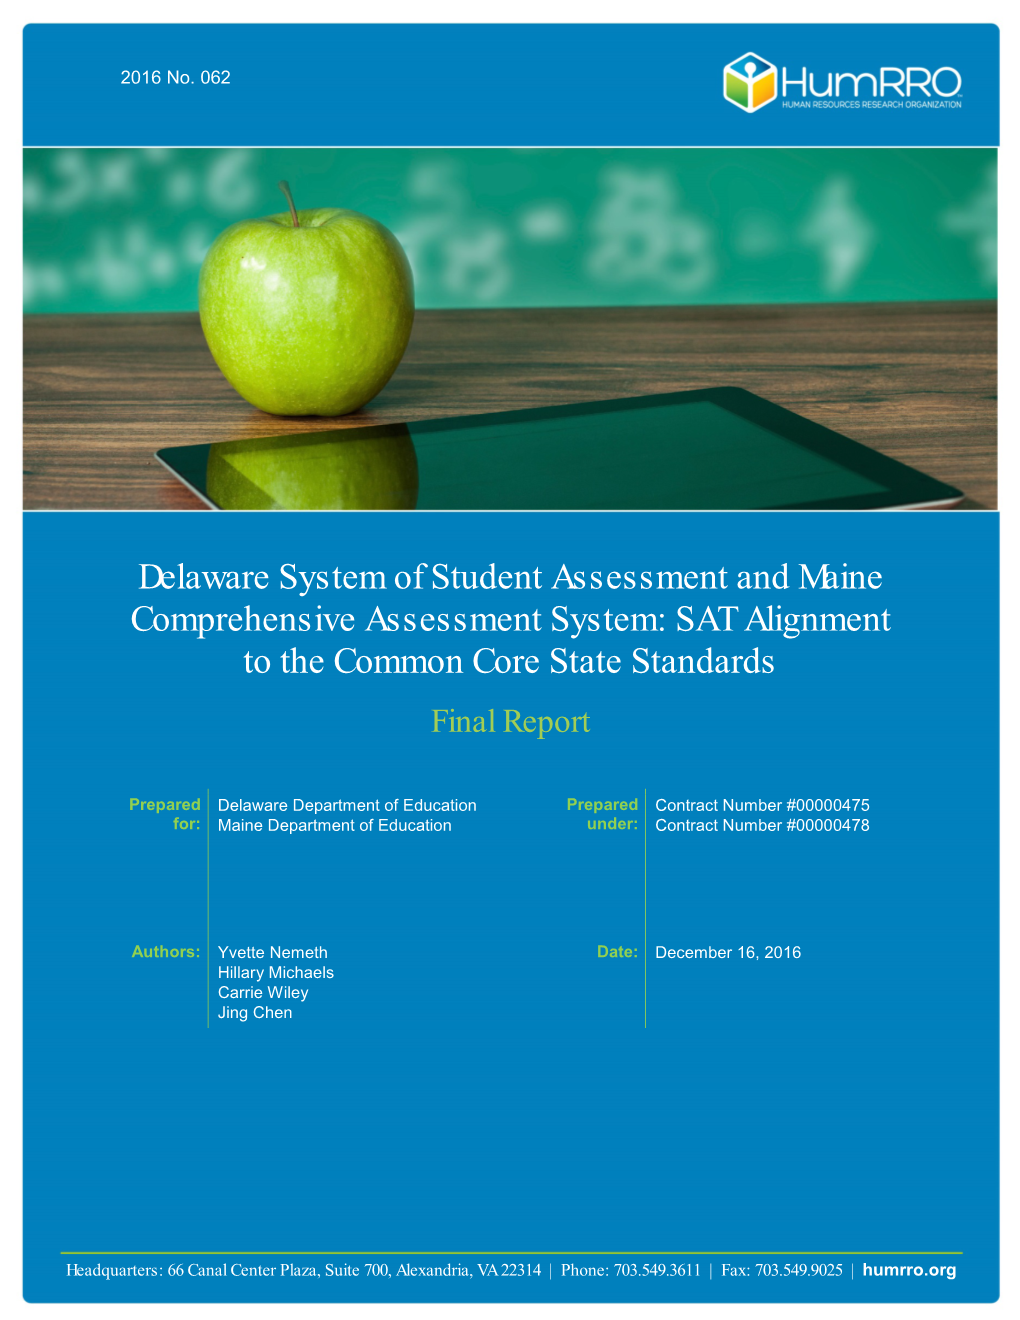 SAT Alignment to the Common Core State Standards Final Report